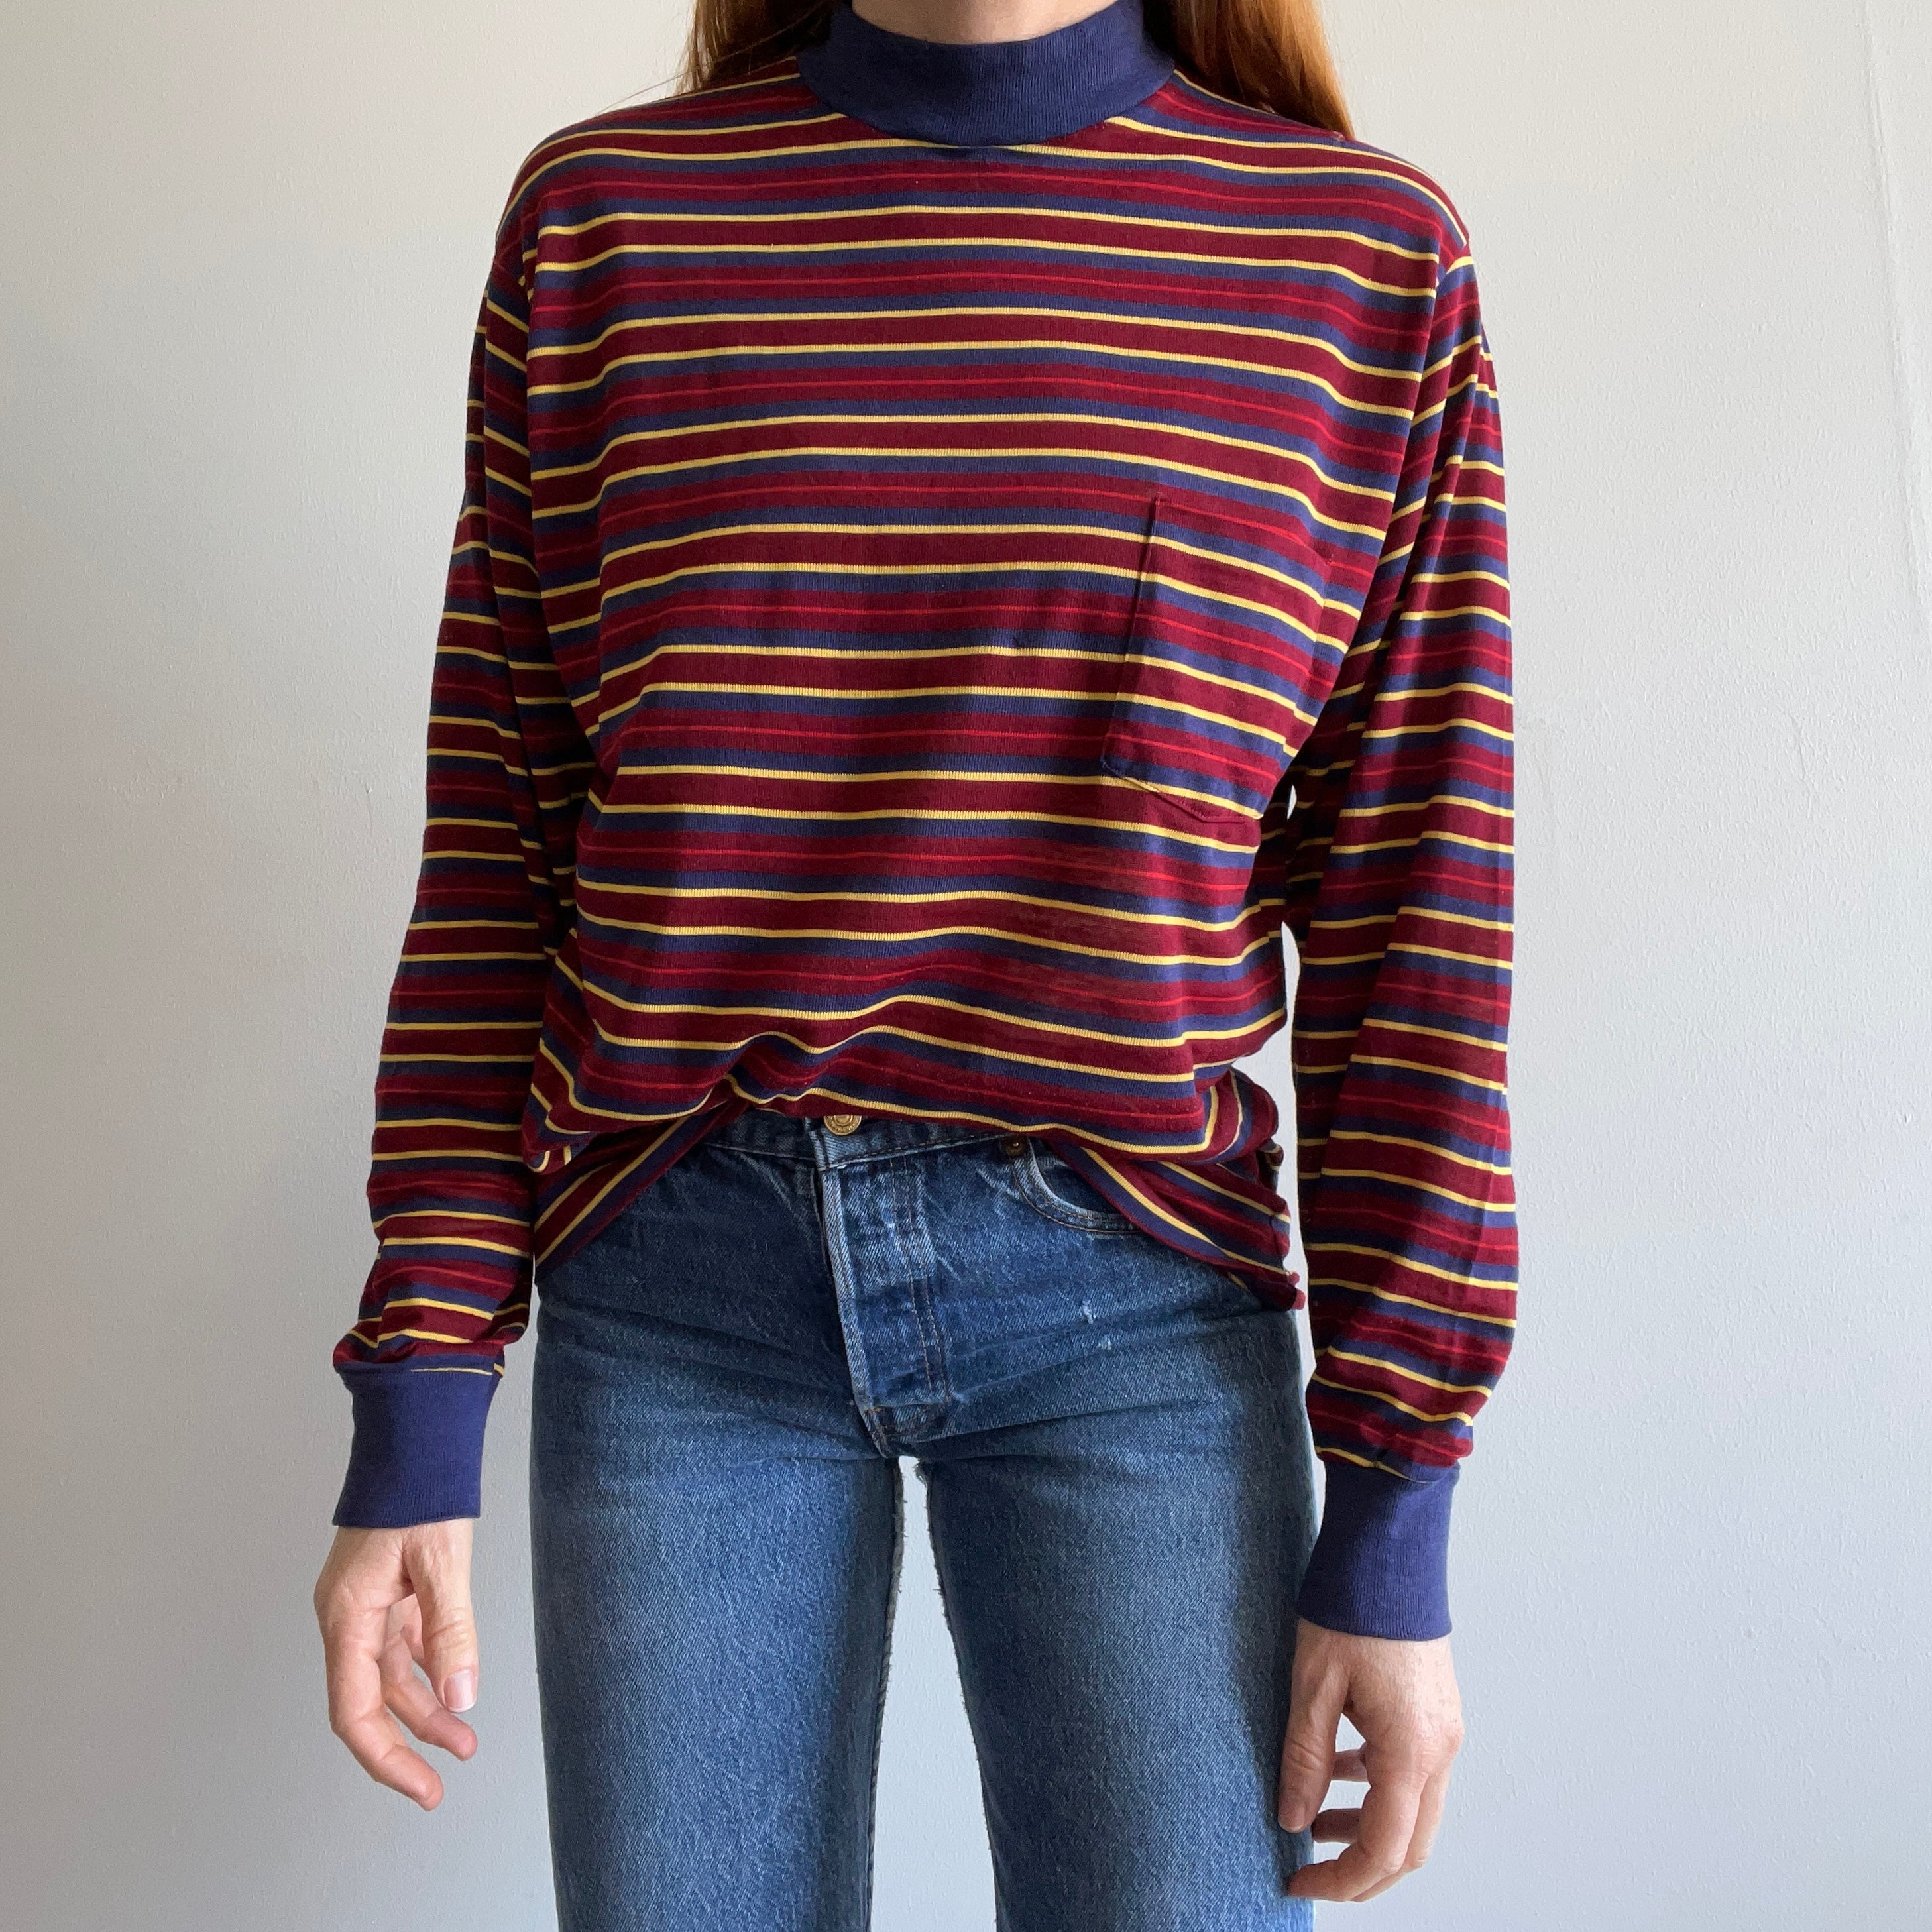 1970s Soft, Thin, Mended, Striped, Pocket Slouchy Long Sleeve Shirt